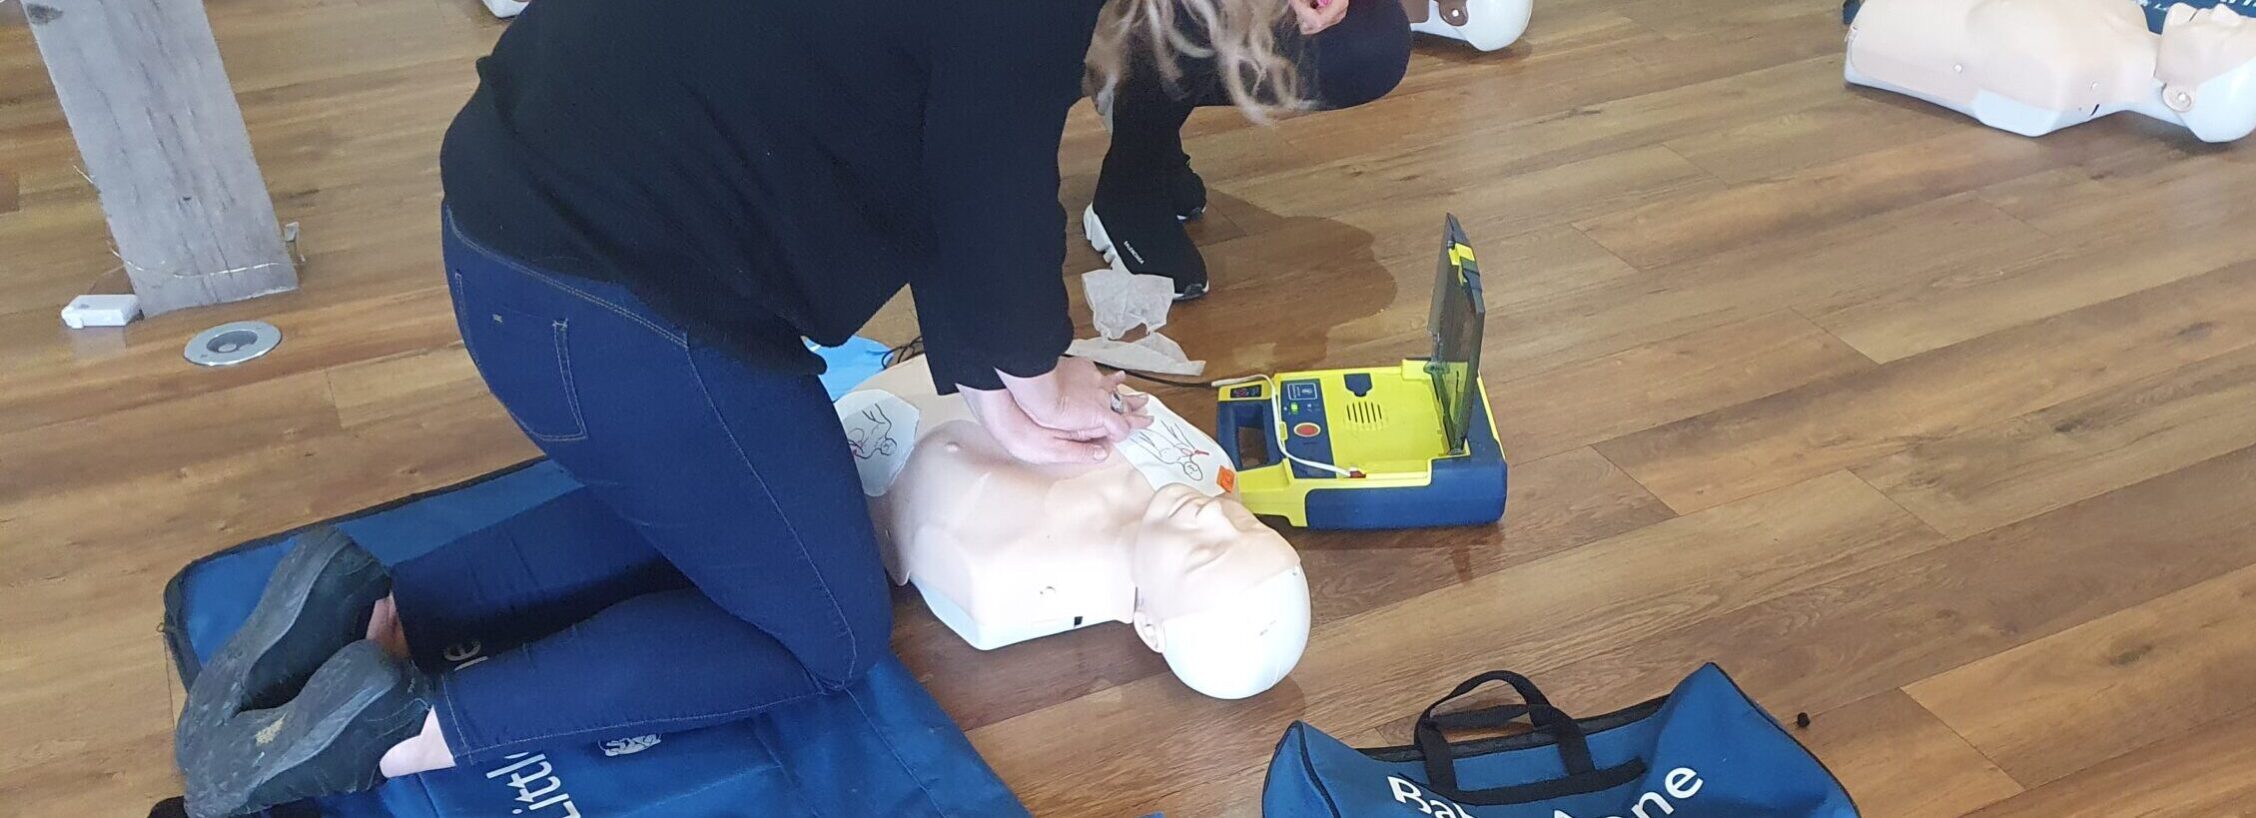 cpr and defib